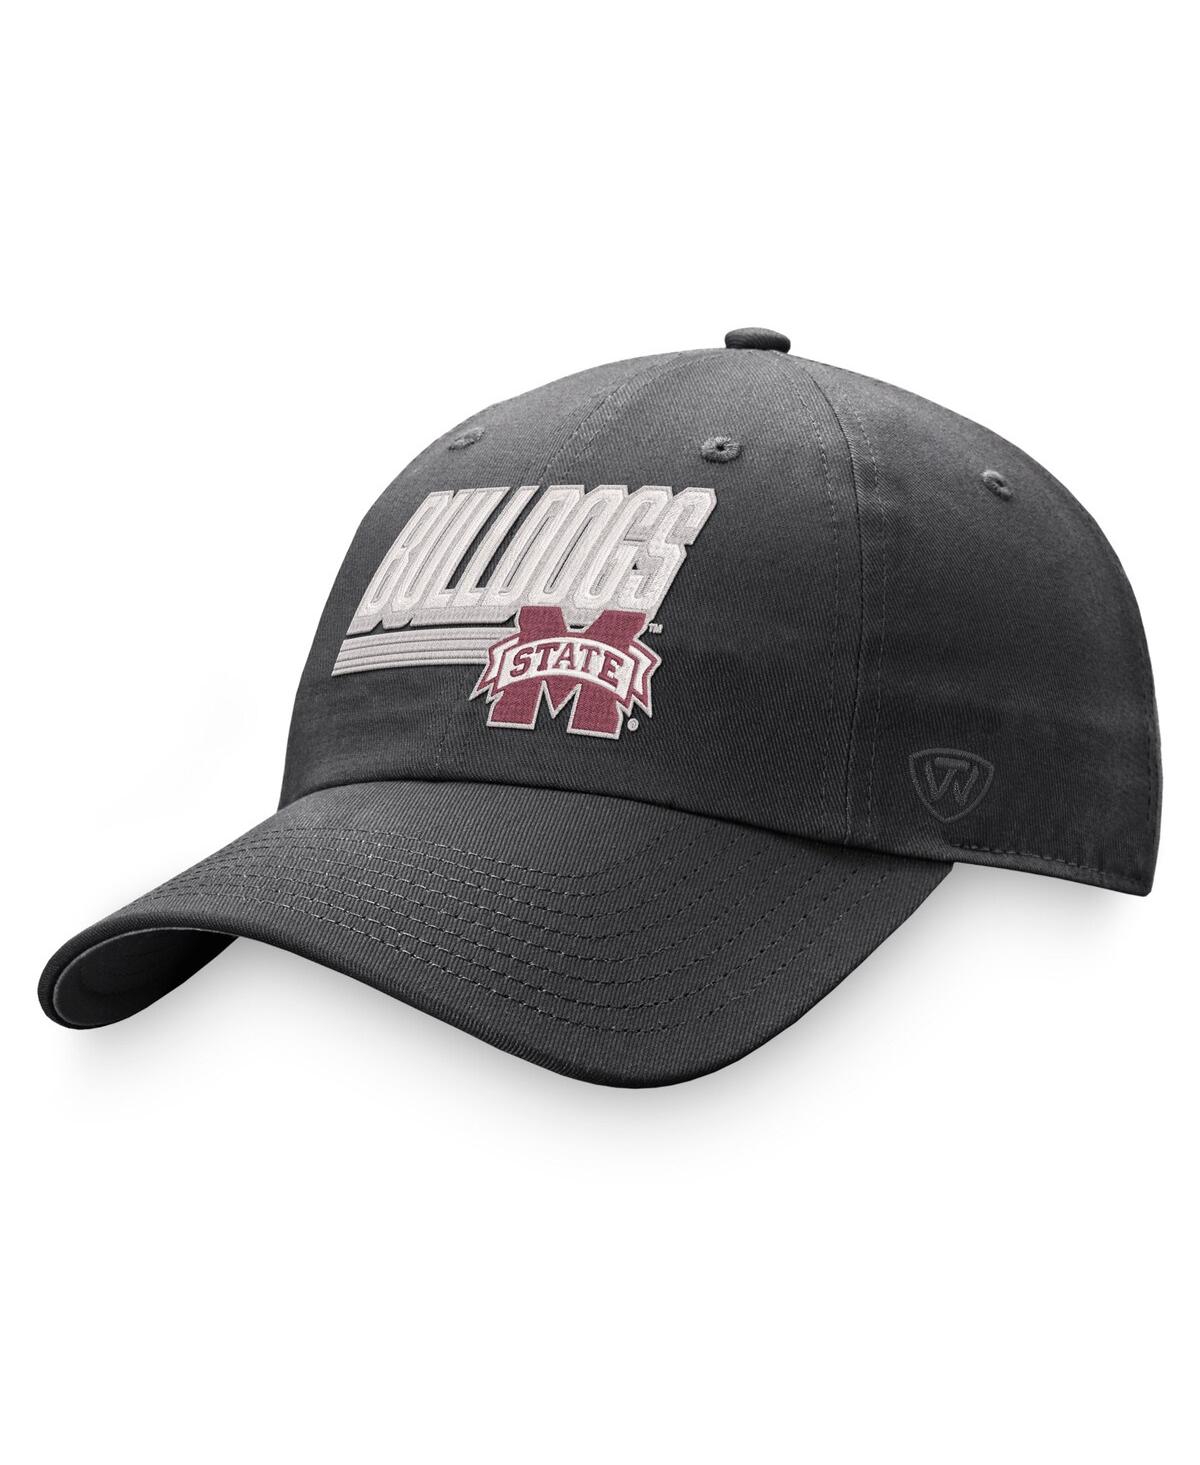 Shop Top Of The World Men's  Charcoal Mississippi State Bulldogs Slice Adjustable Hat